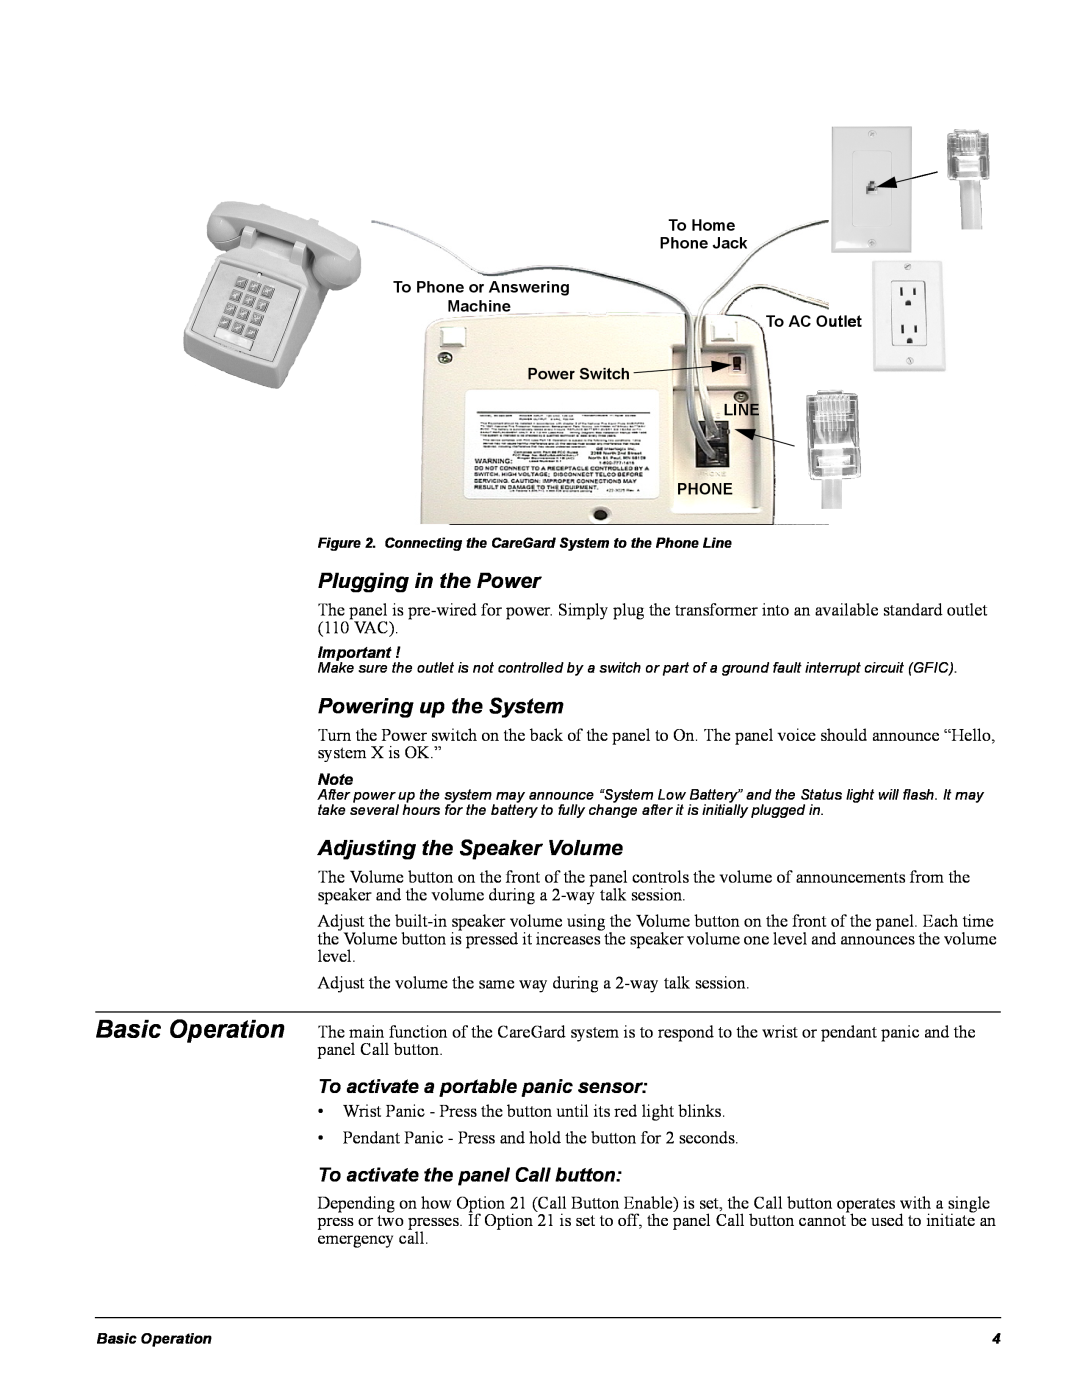 GE 60-883-95R installation instructions Plugging in the Power, Powering up the System, Adjusting the Speaker Volume 